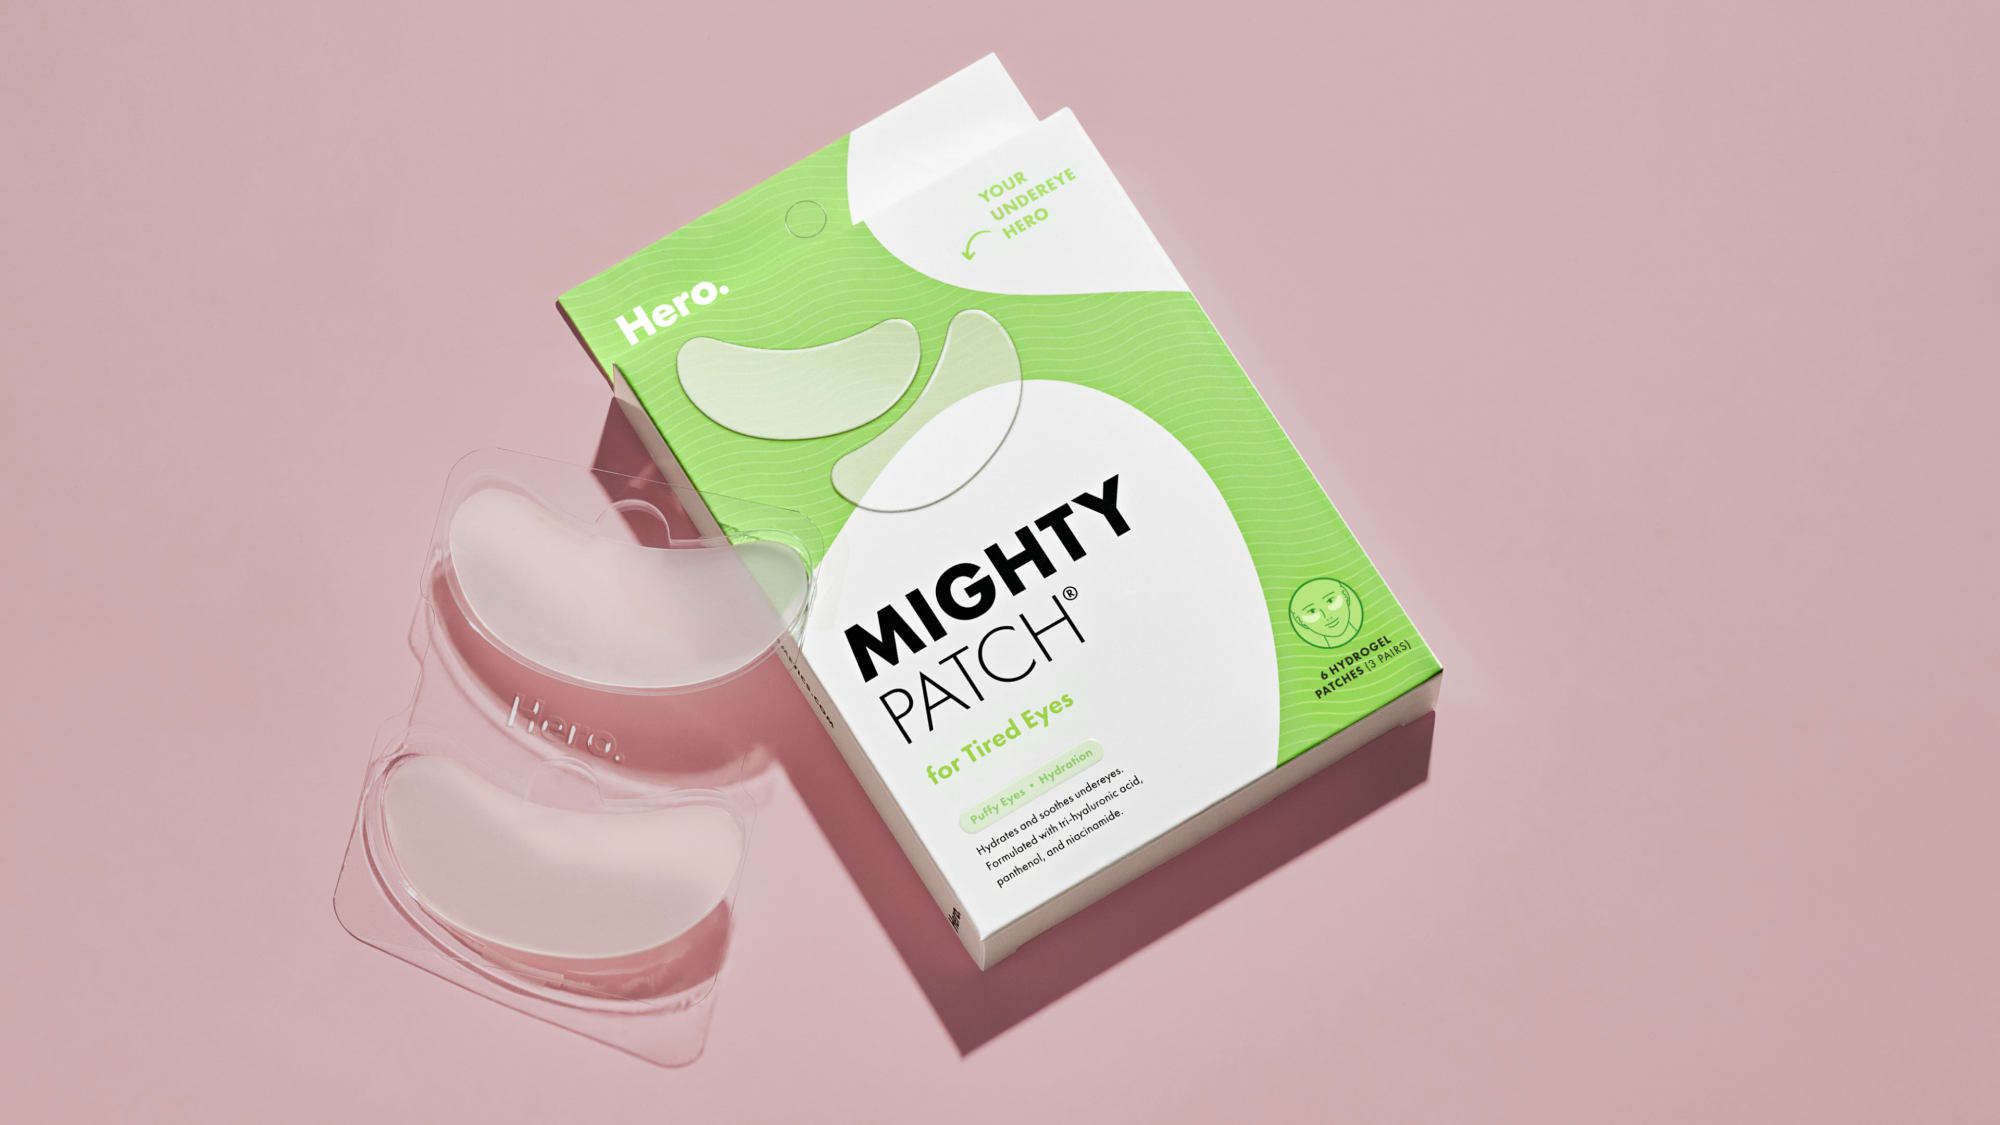 The Patch Brand Reimagines Health With Launch of Vitamin Patches